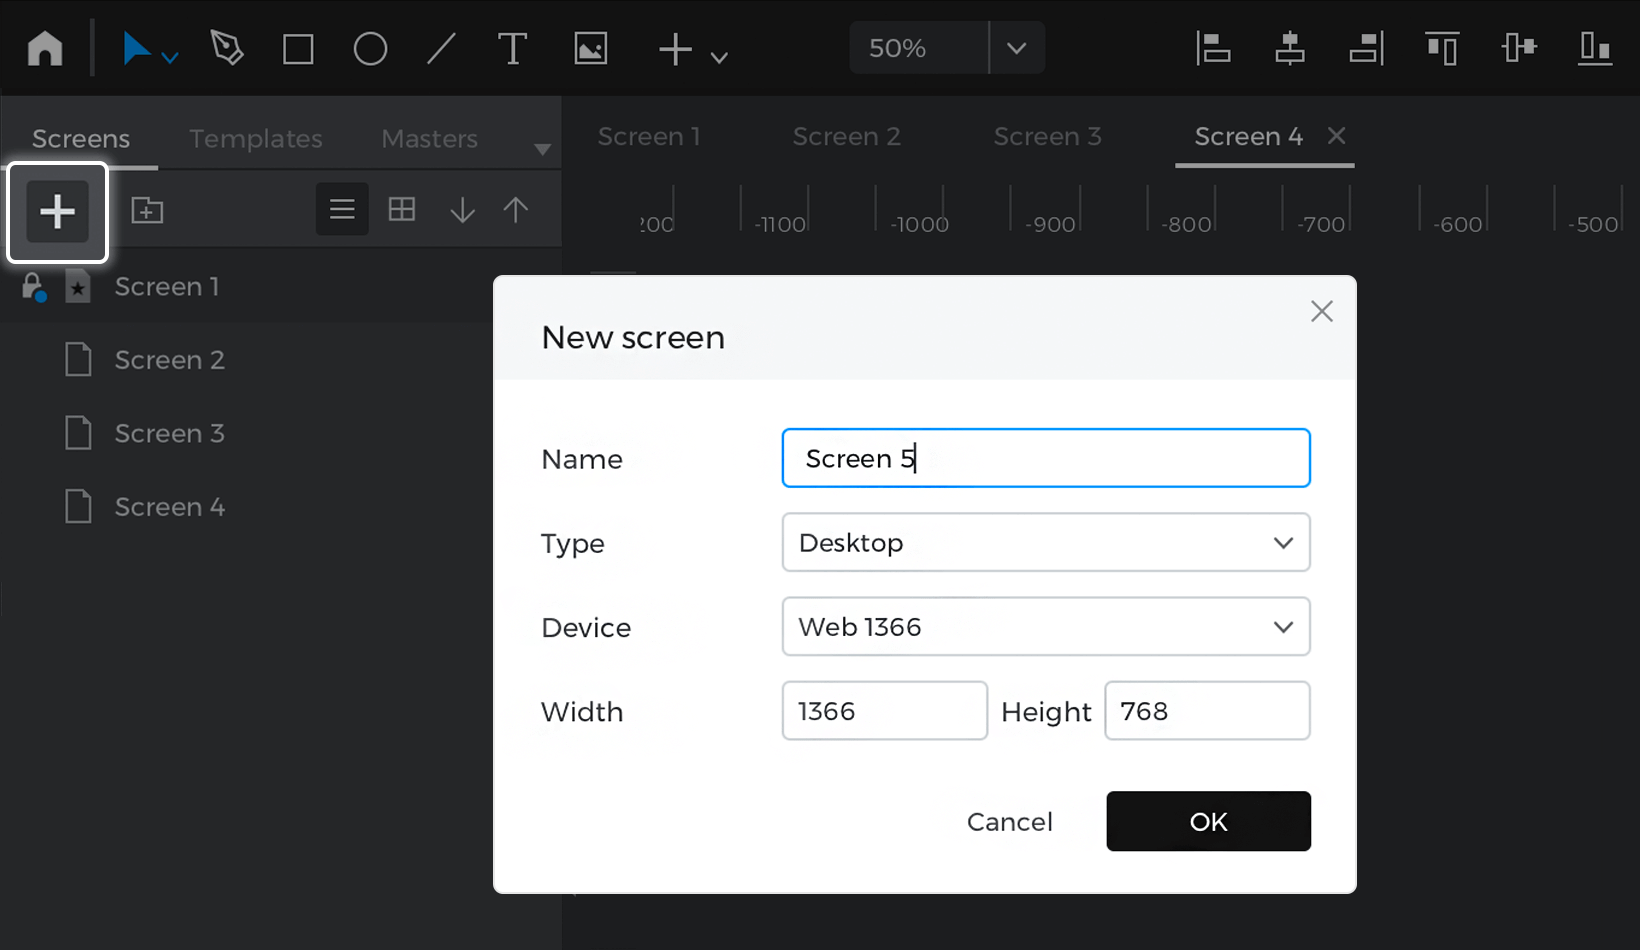 Create a new screen by clicking the + button